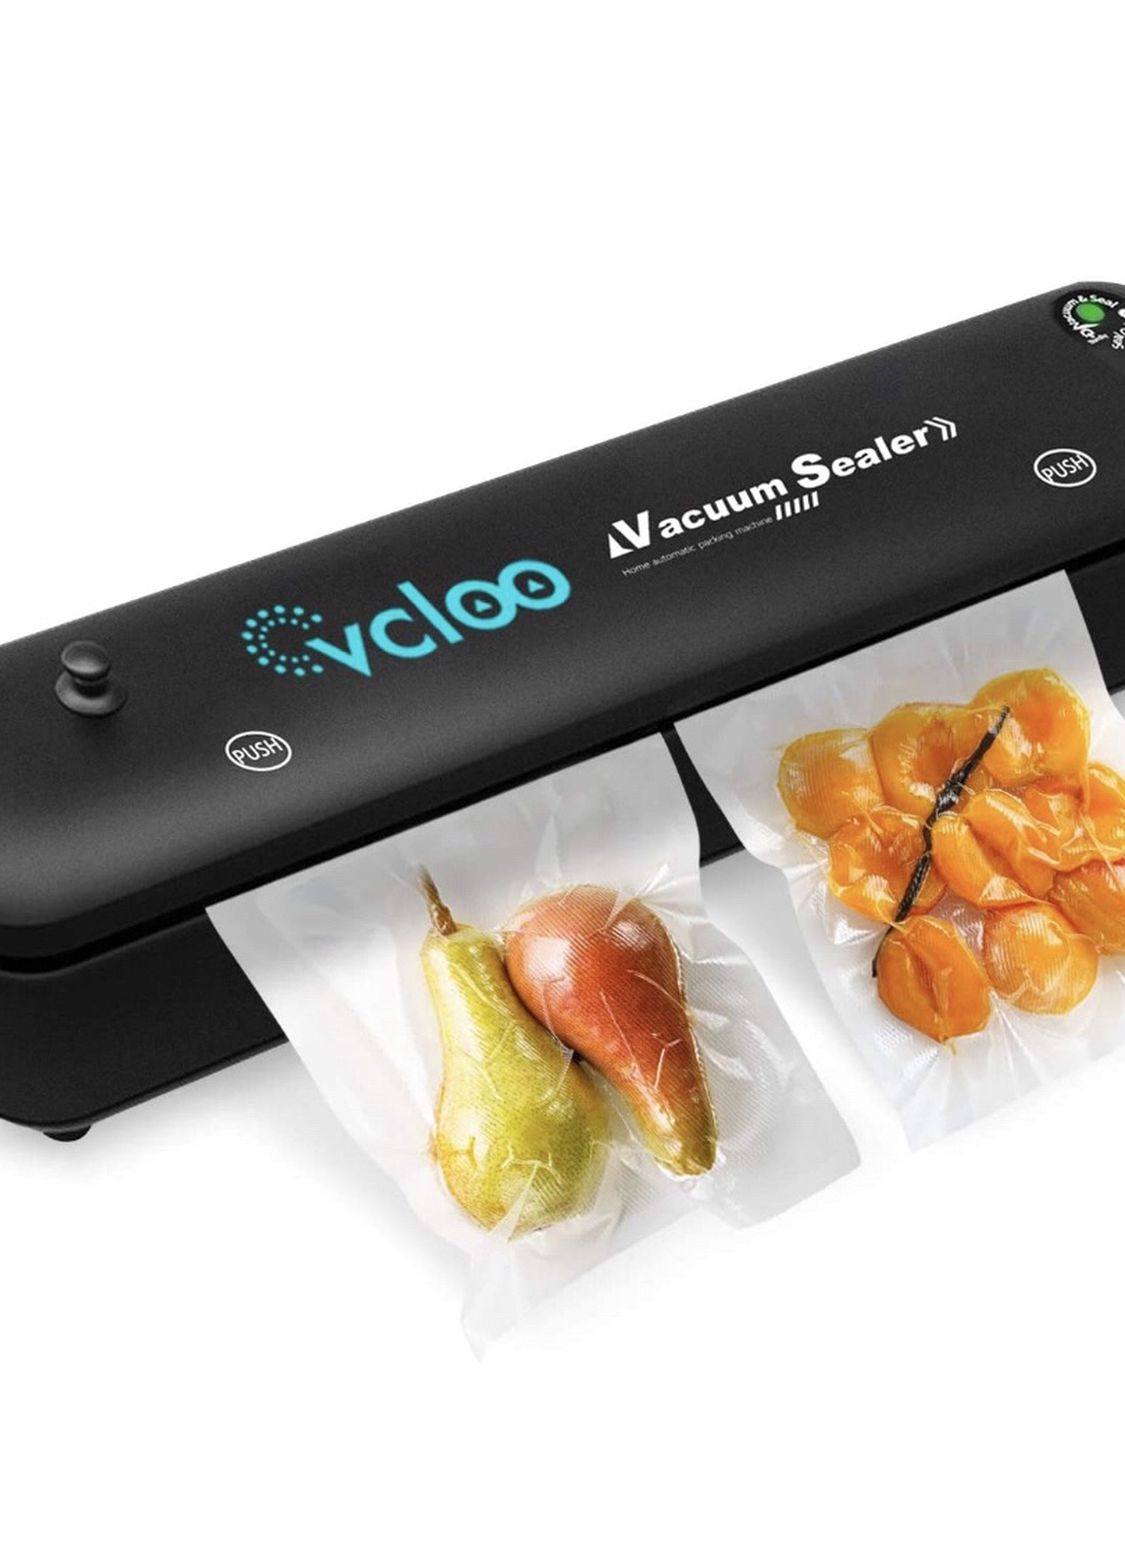 Vacuum Sealer Machine Air Sealing System For Food Preservation, Automatic Food Sealer with Dry Food Modes